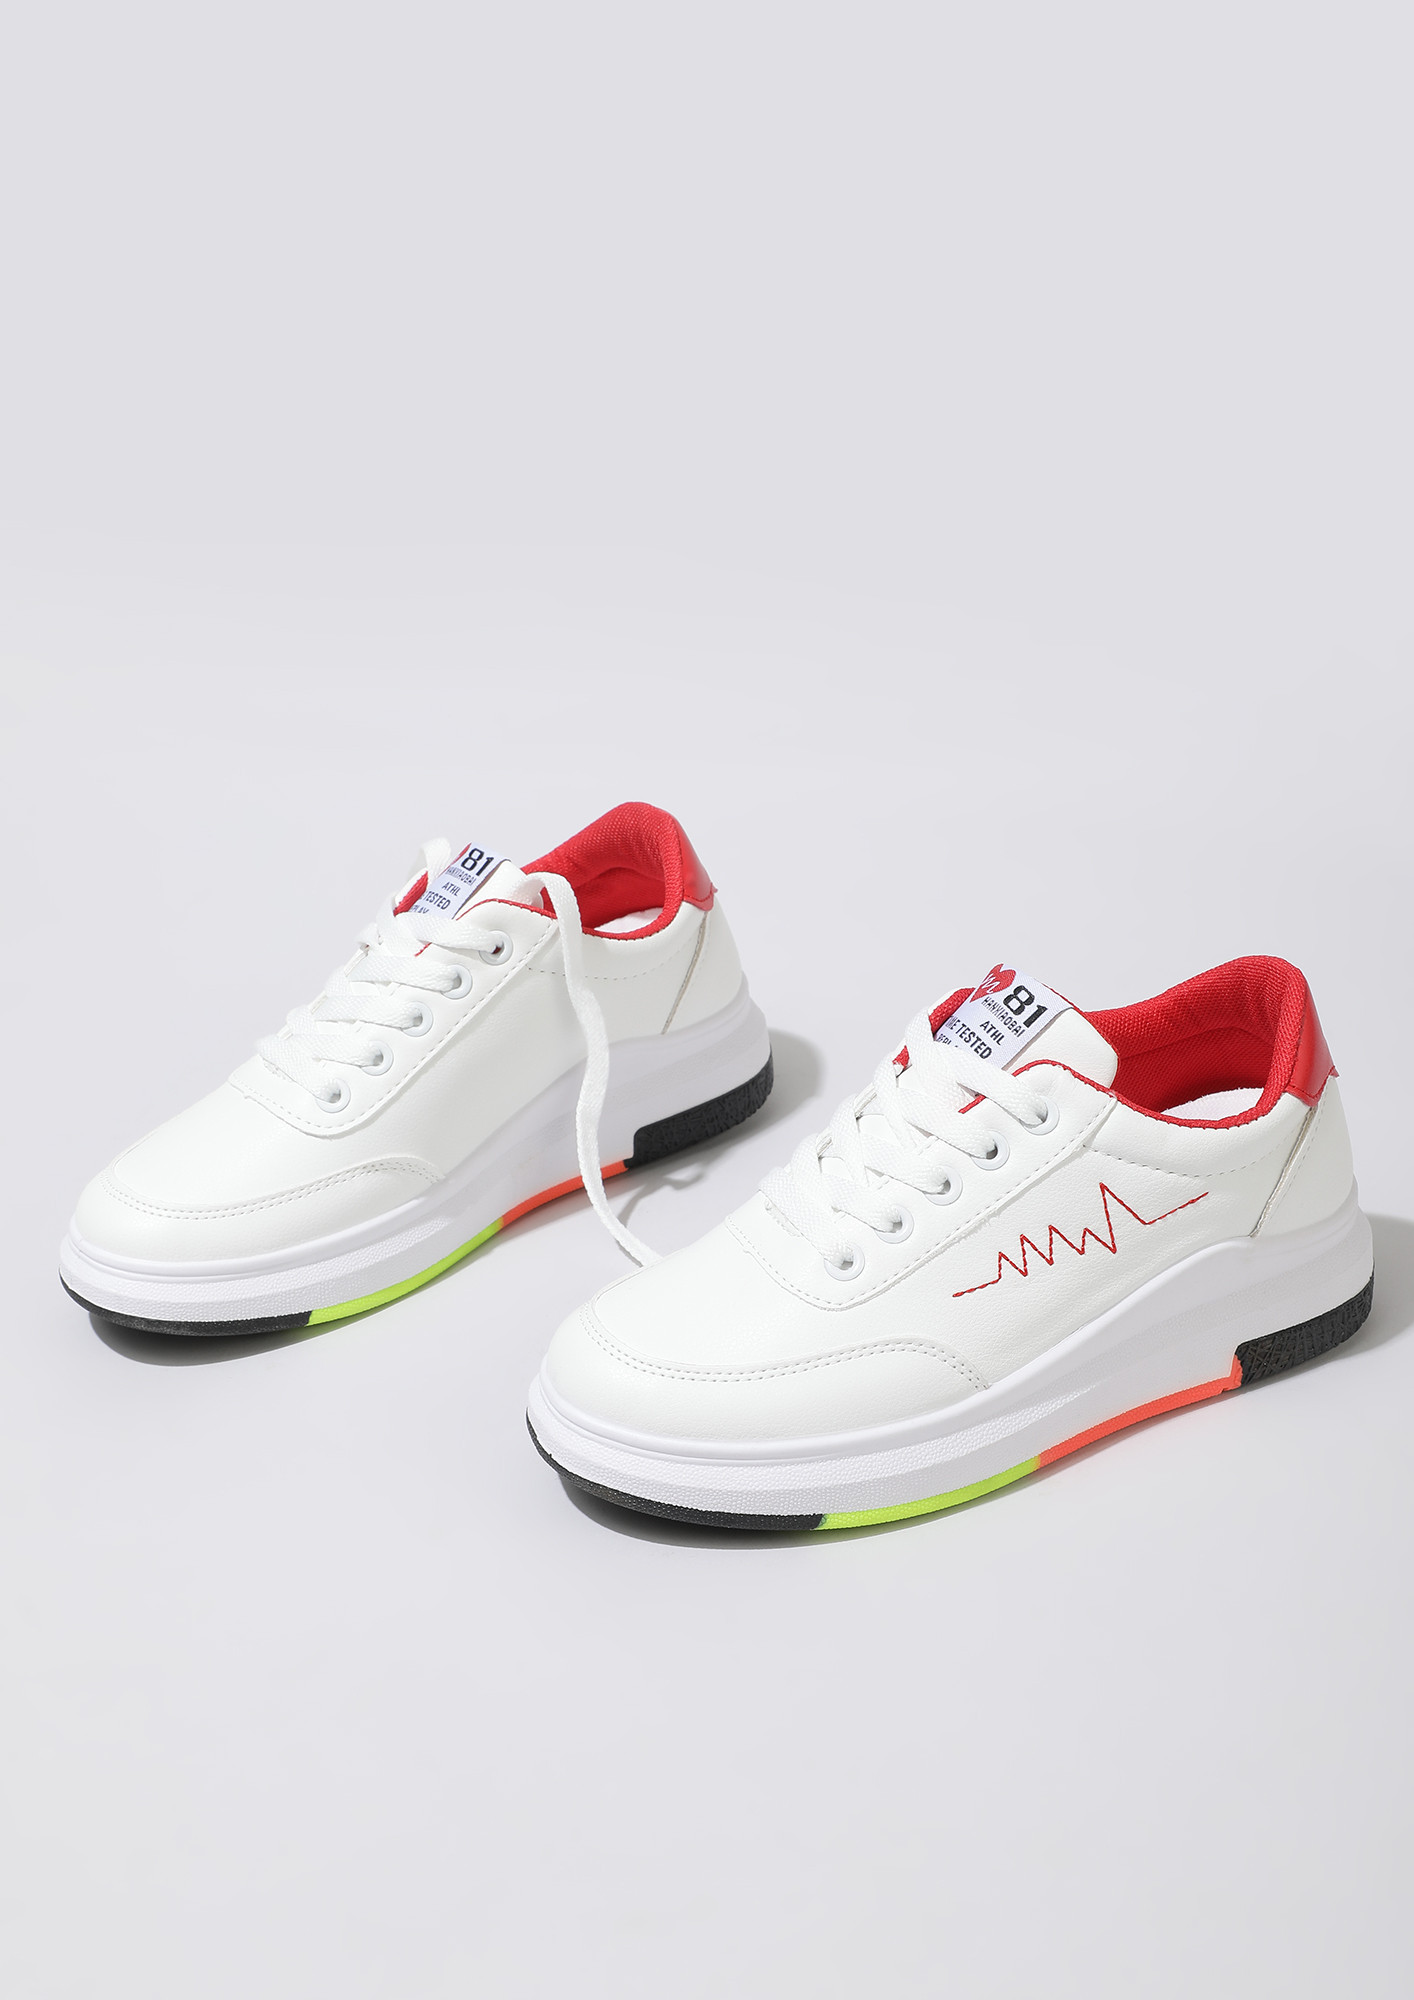 SNEAKERHEAD MUST HAVE WHITE RED TRAINERS